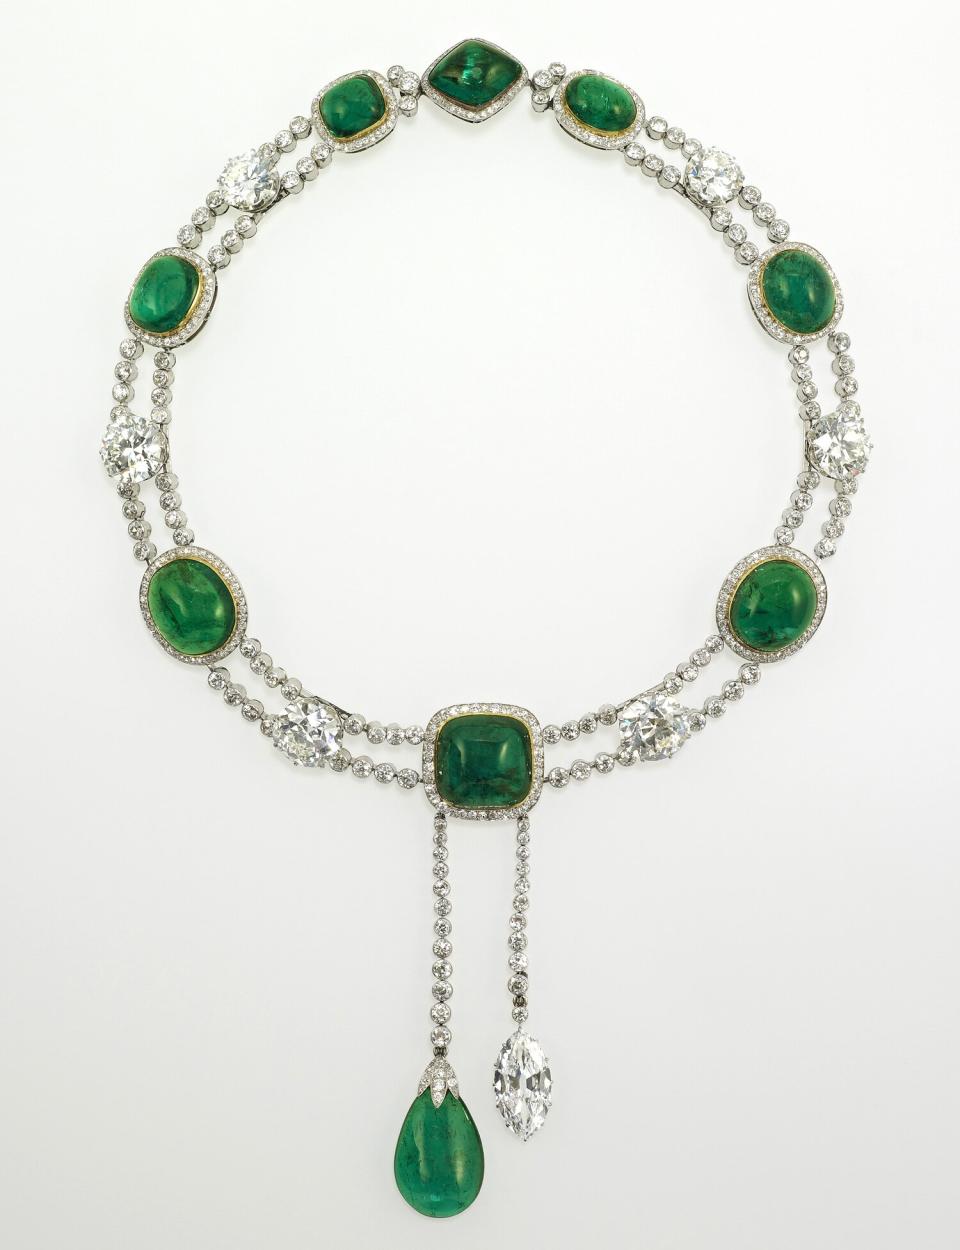 Her Majesty The Queen’s jewellery to feature in Platinum Jubilee displays at the Official Royal Residences - Garrards, Delhi Durbar Necklace, c.1911